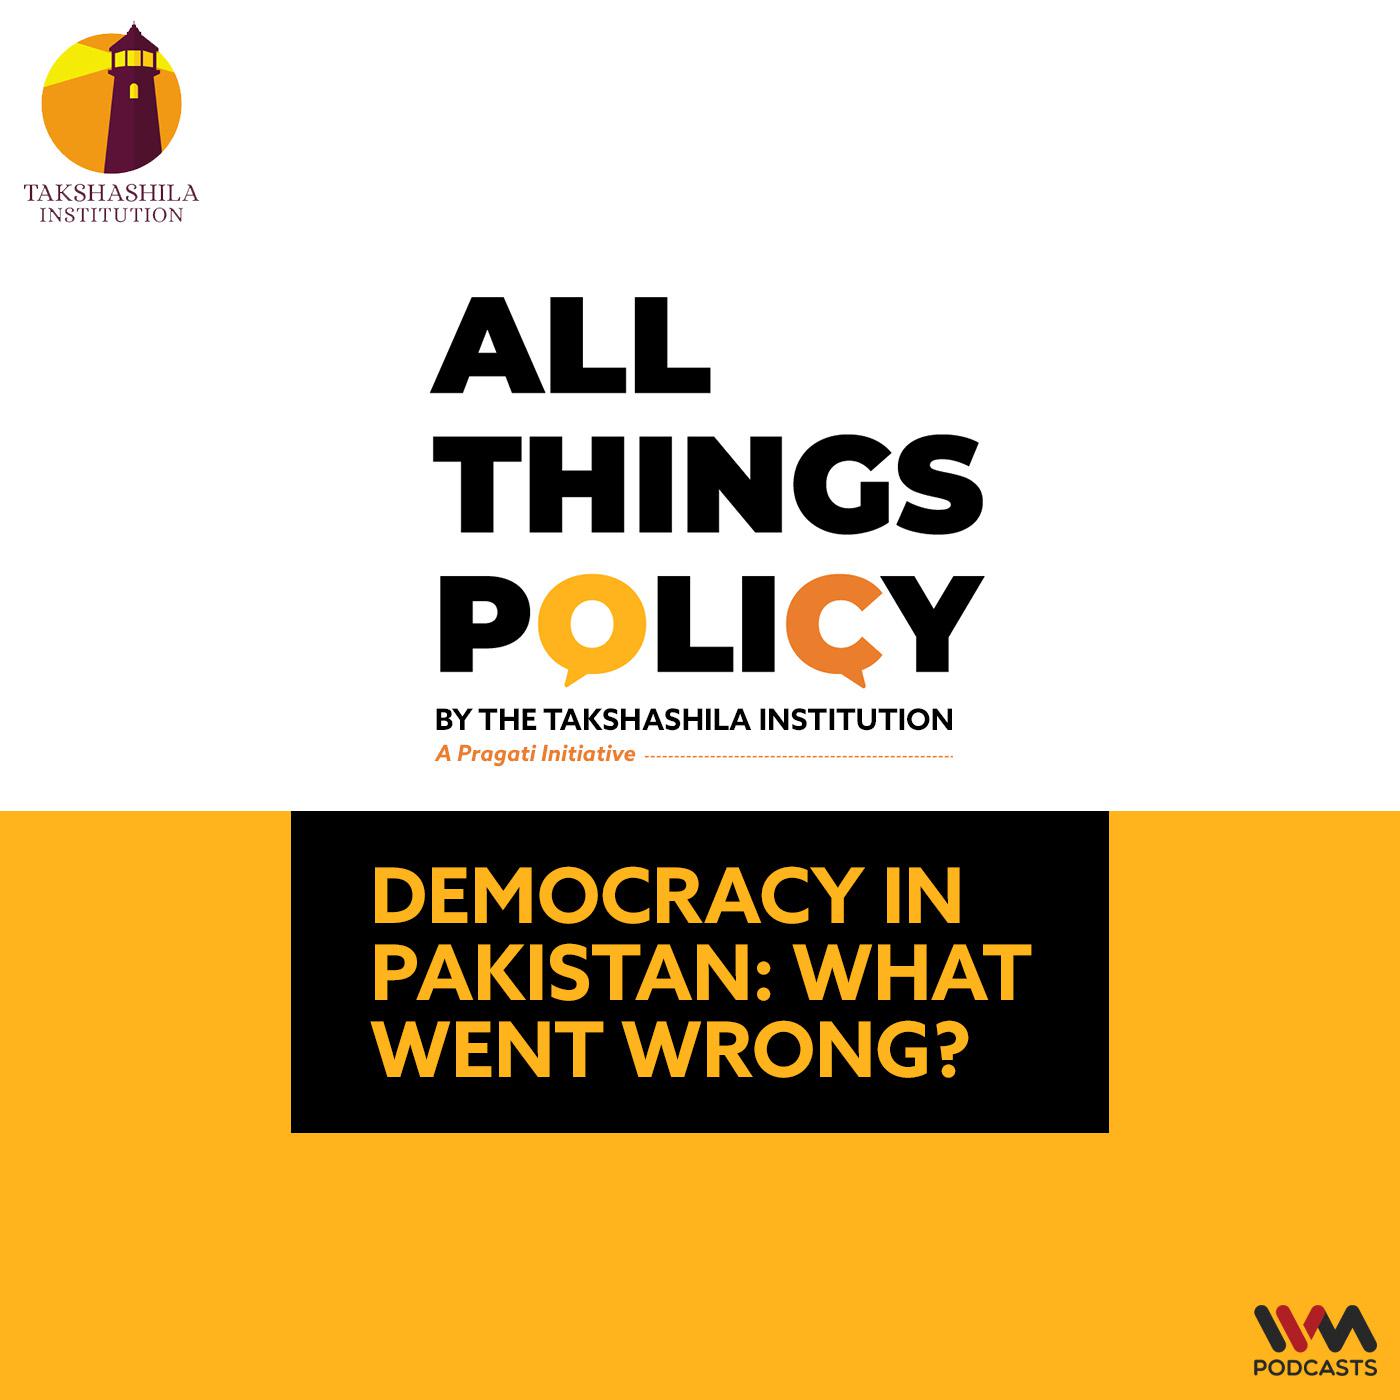 Democracy in Pakistan: What Went Wrong?